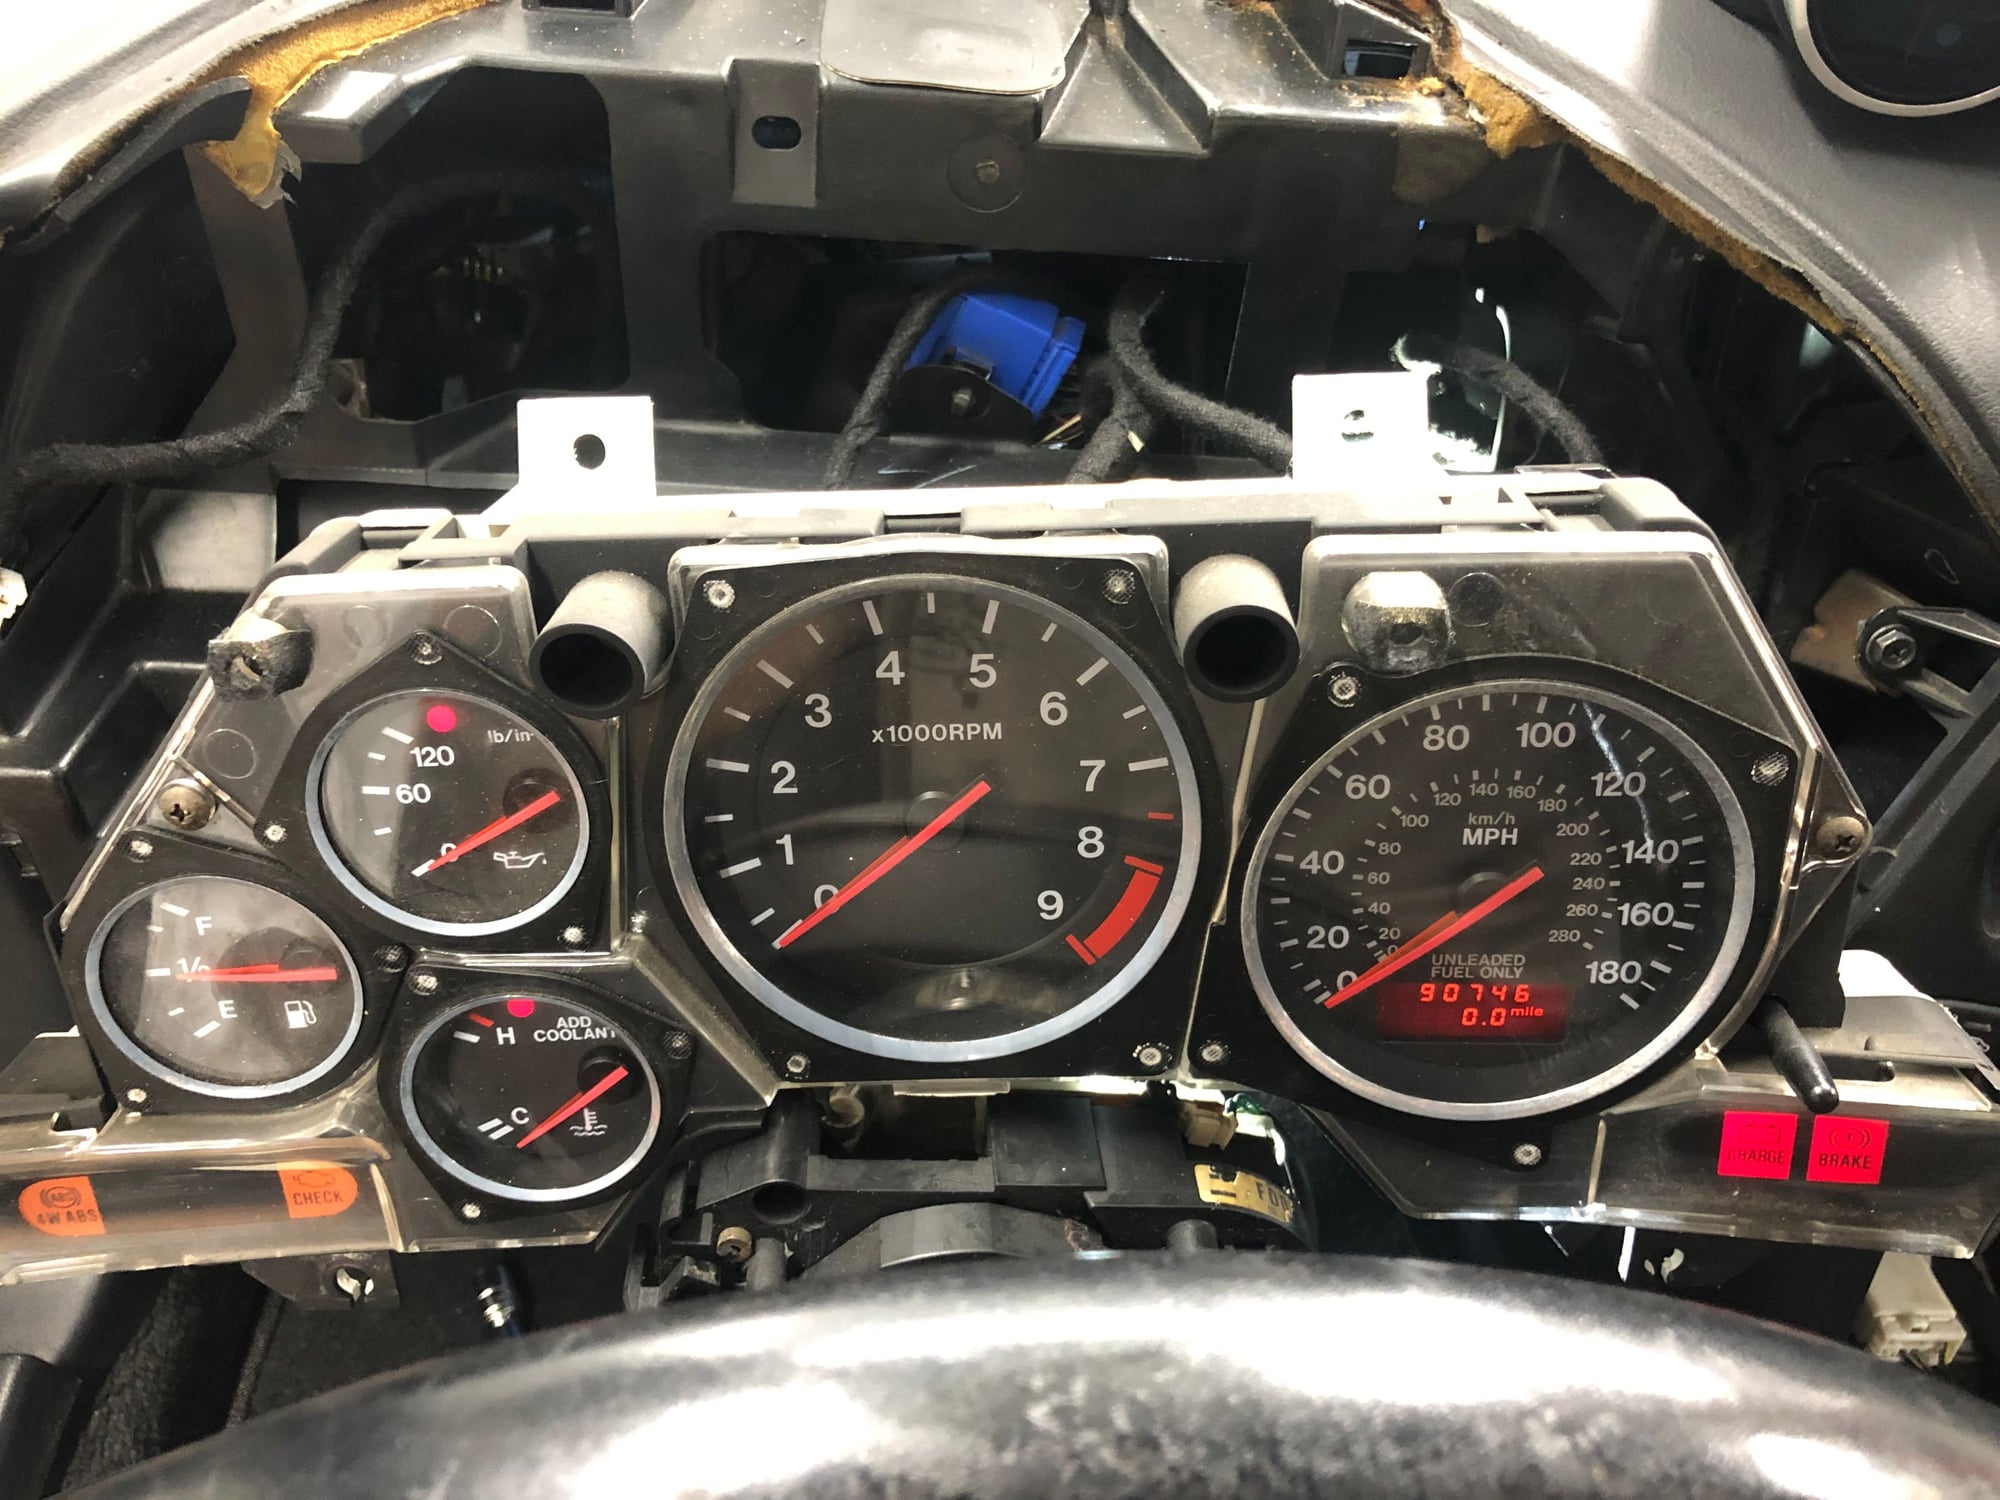 Accessories - LHD Gauge Cluster + Misc Parts - Used - 1993 to 1995 Mazda RX-7 - San Diego, CA 92109, United States